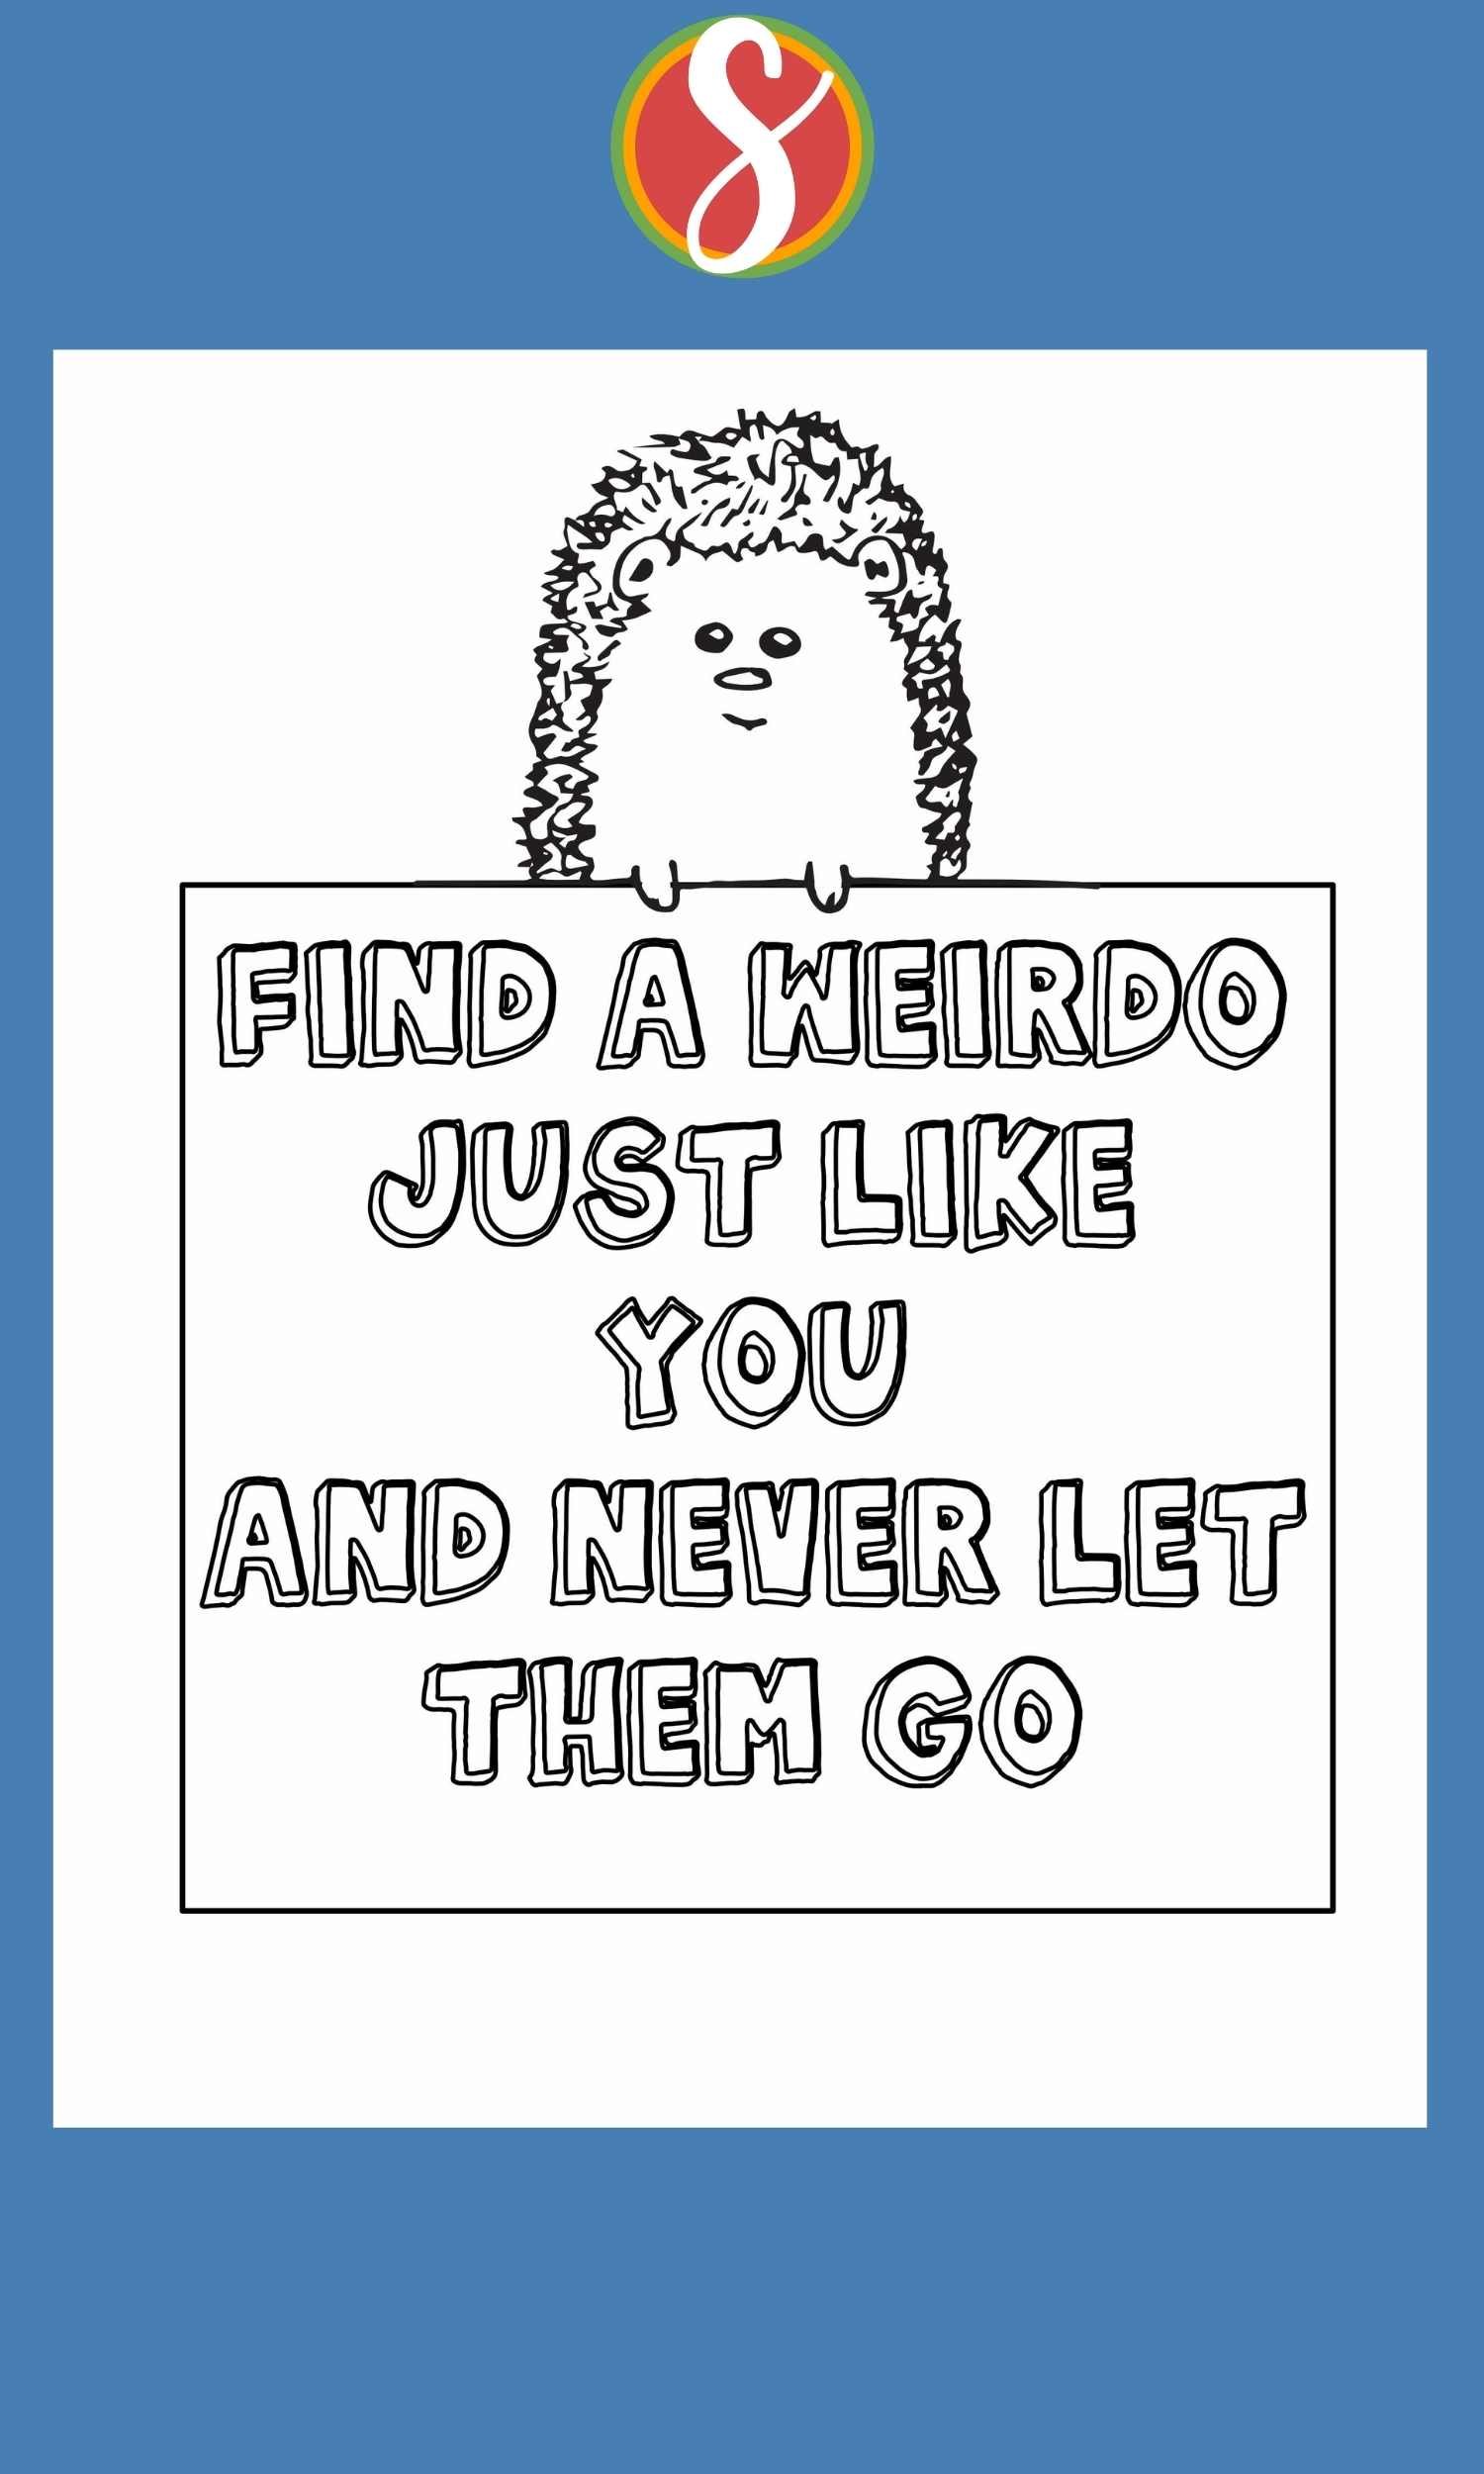 a hedgehog coloring page with hedgehog peeking out over top of sign reading  "find a weirdo just like you and never let them go"